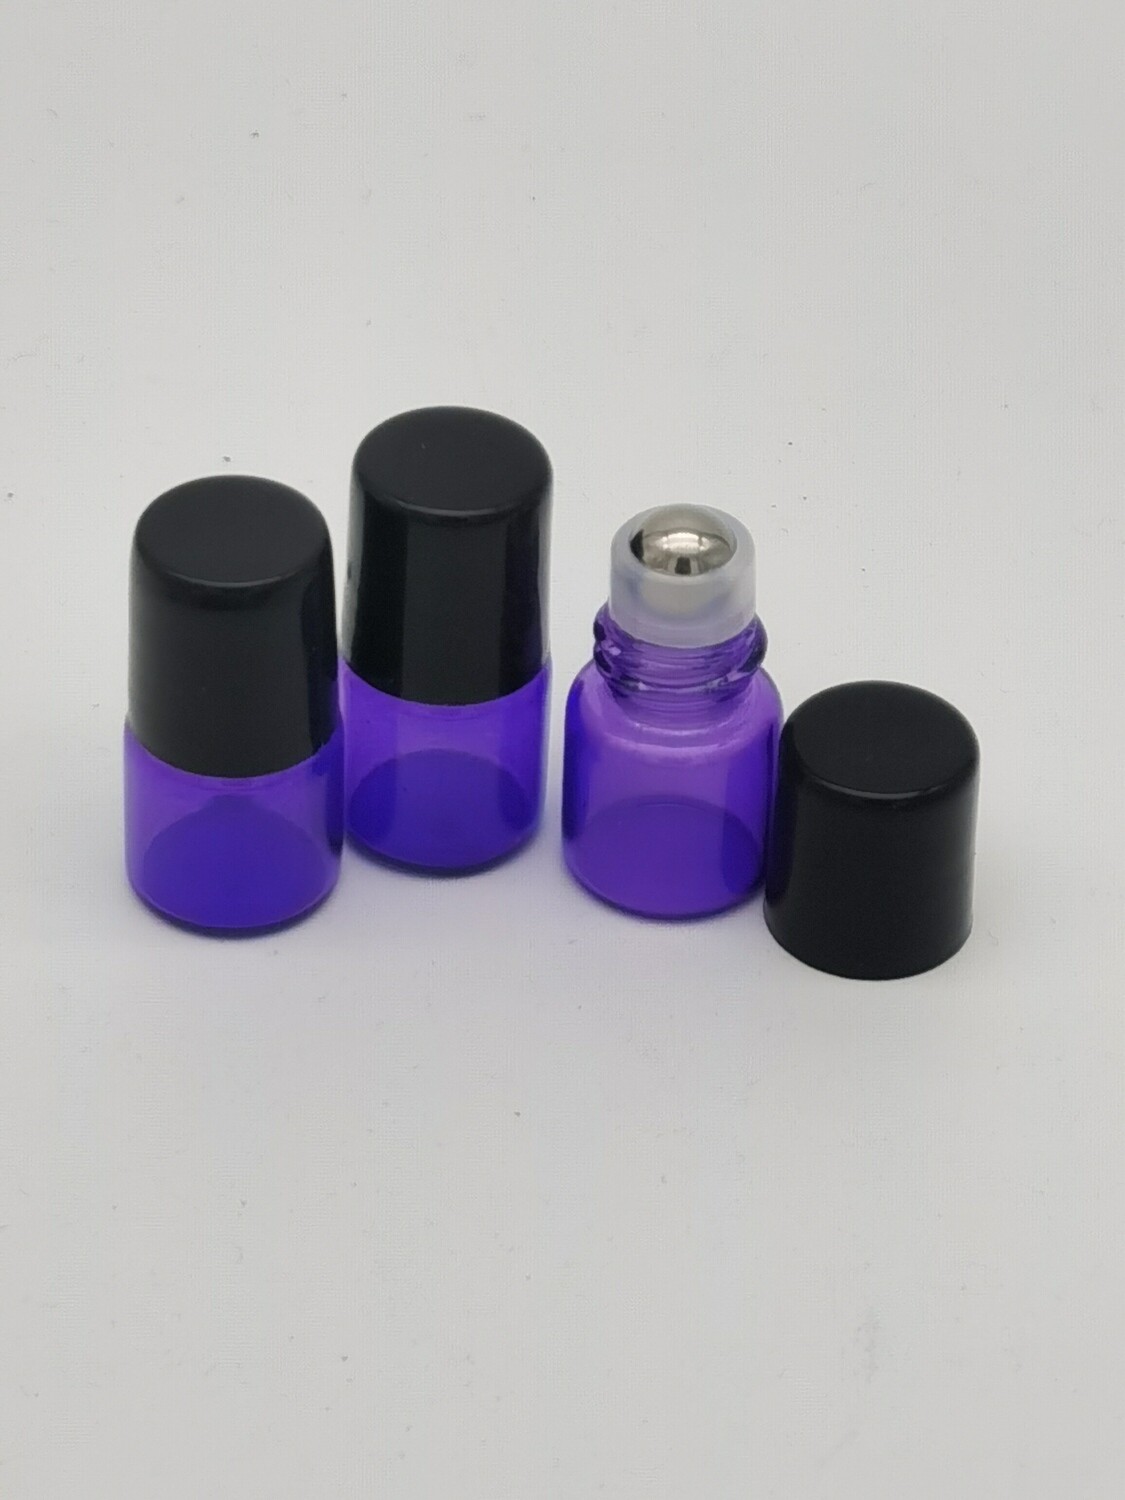 1ml Amber Glass Rollon with Metal Roller Ball (White Housing) and Black Cap - PACK of 100 Pcs